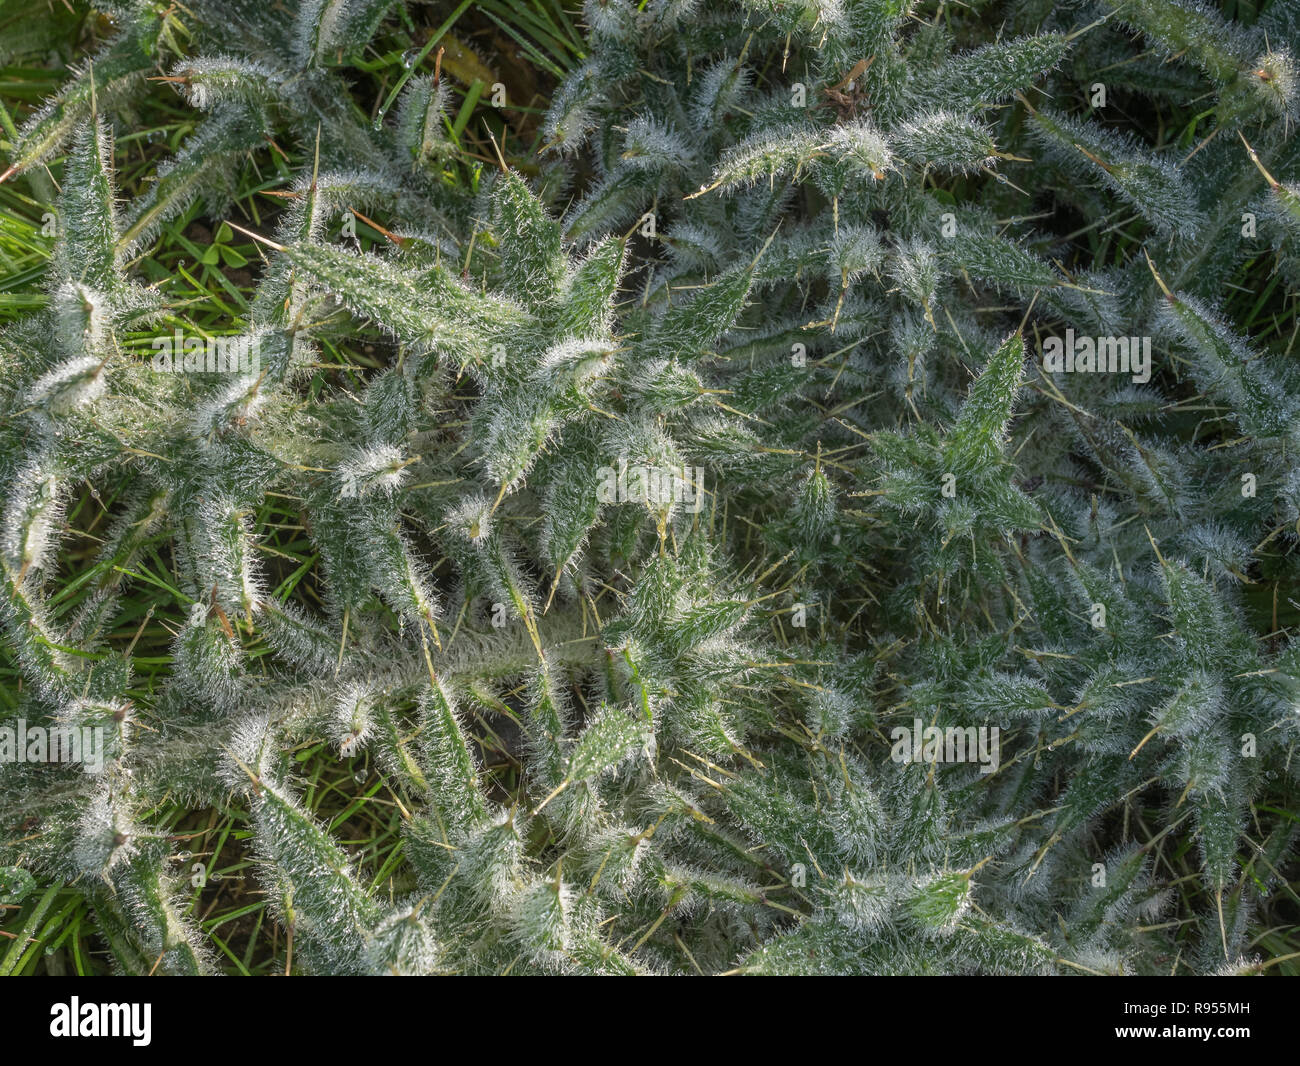 Winter leaf rosette of Spear Thistle / Cirsium vulgare - the furry leaves covered in fine droplets of water. Stock Photo